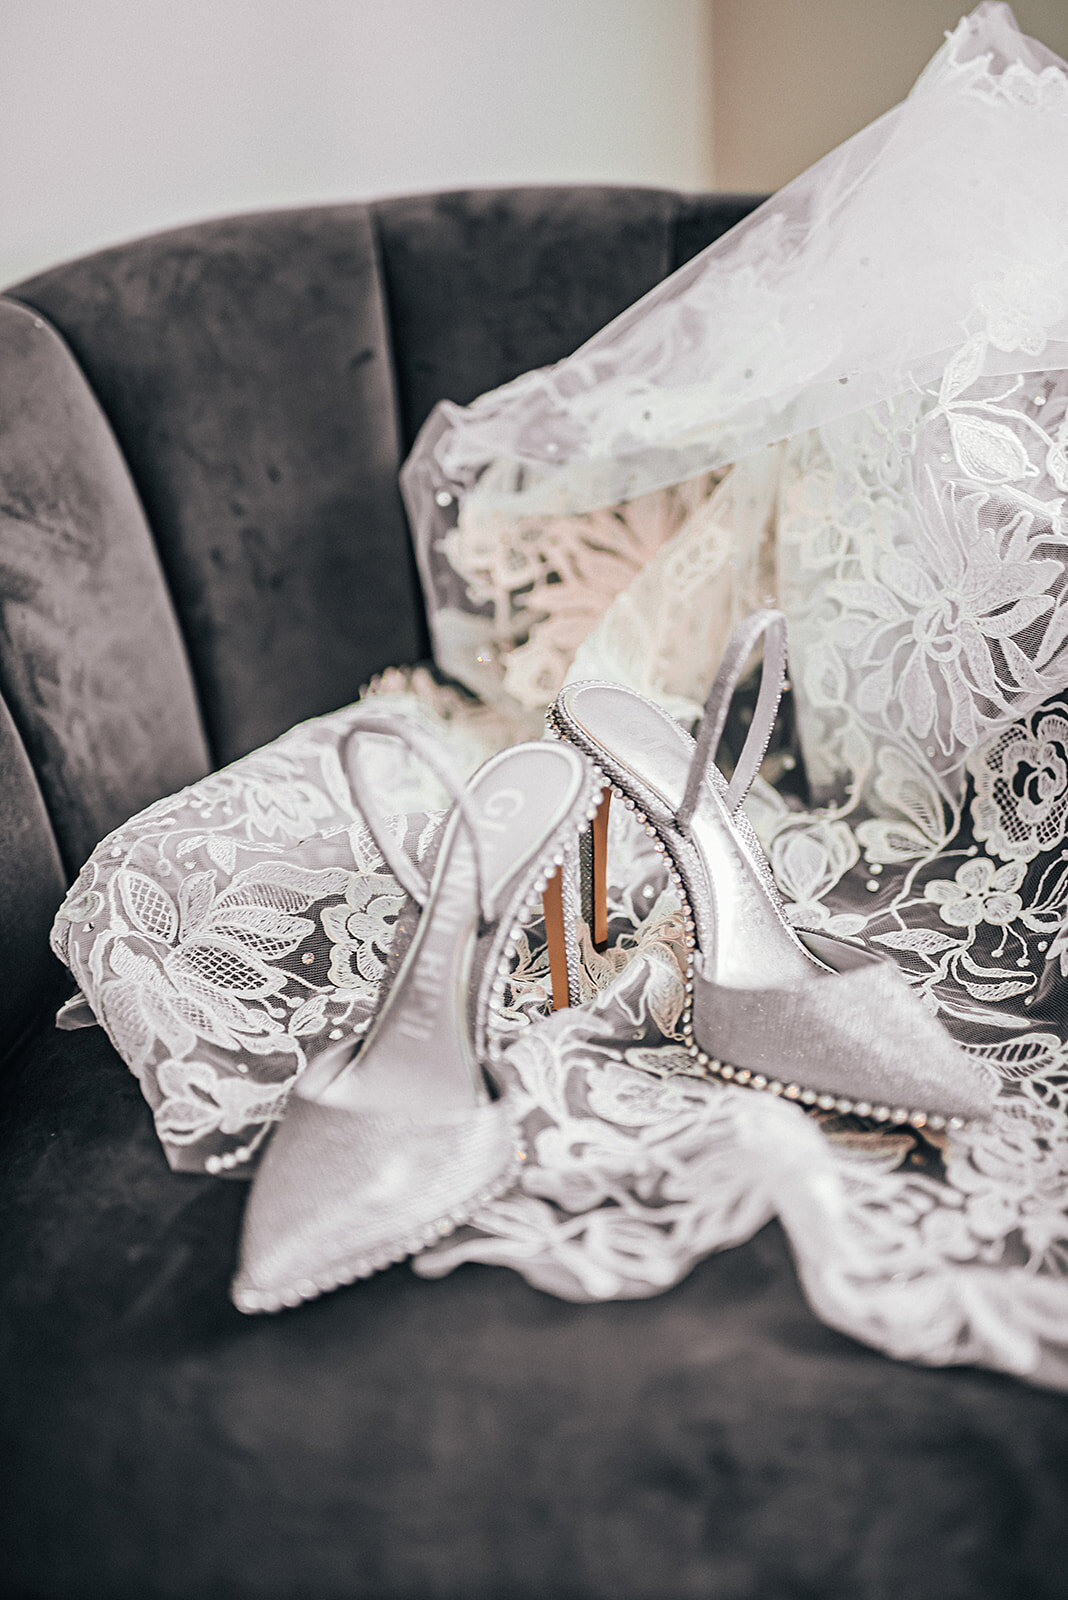 Beautiful lace veil and silver wedding shoes  with embellishments